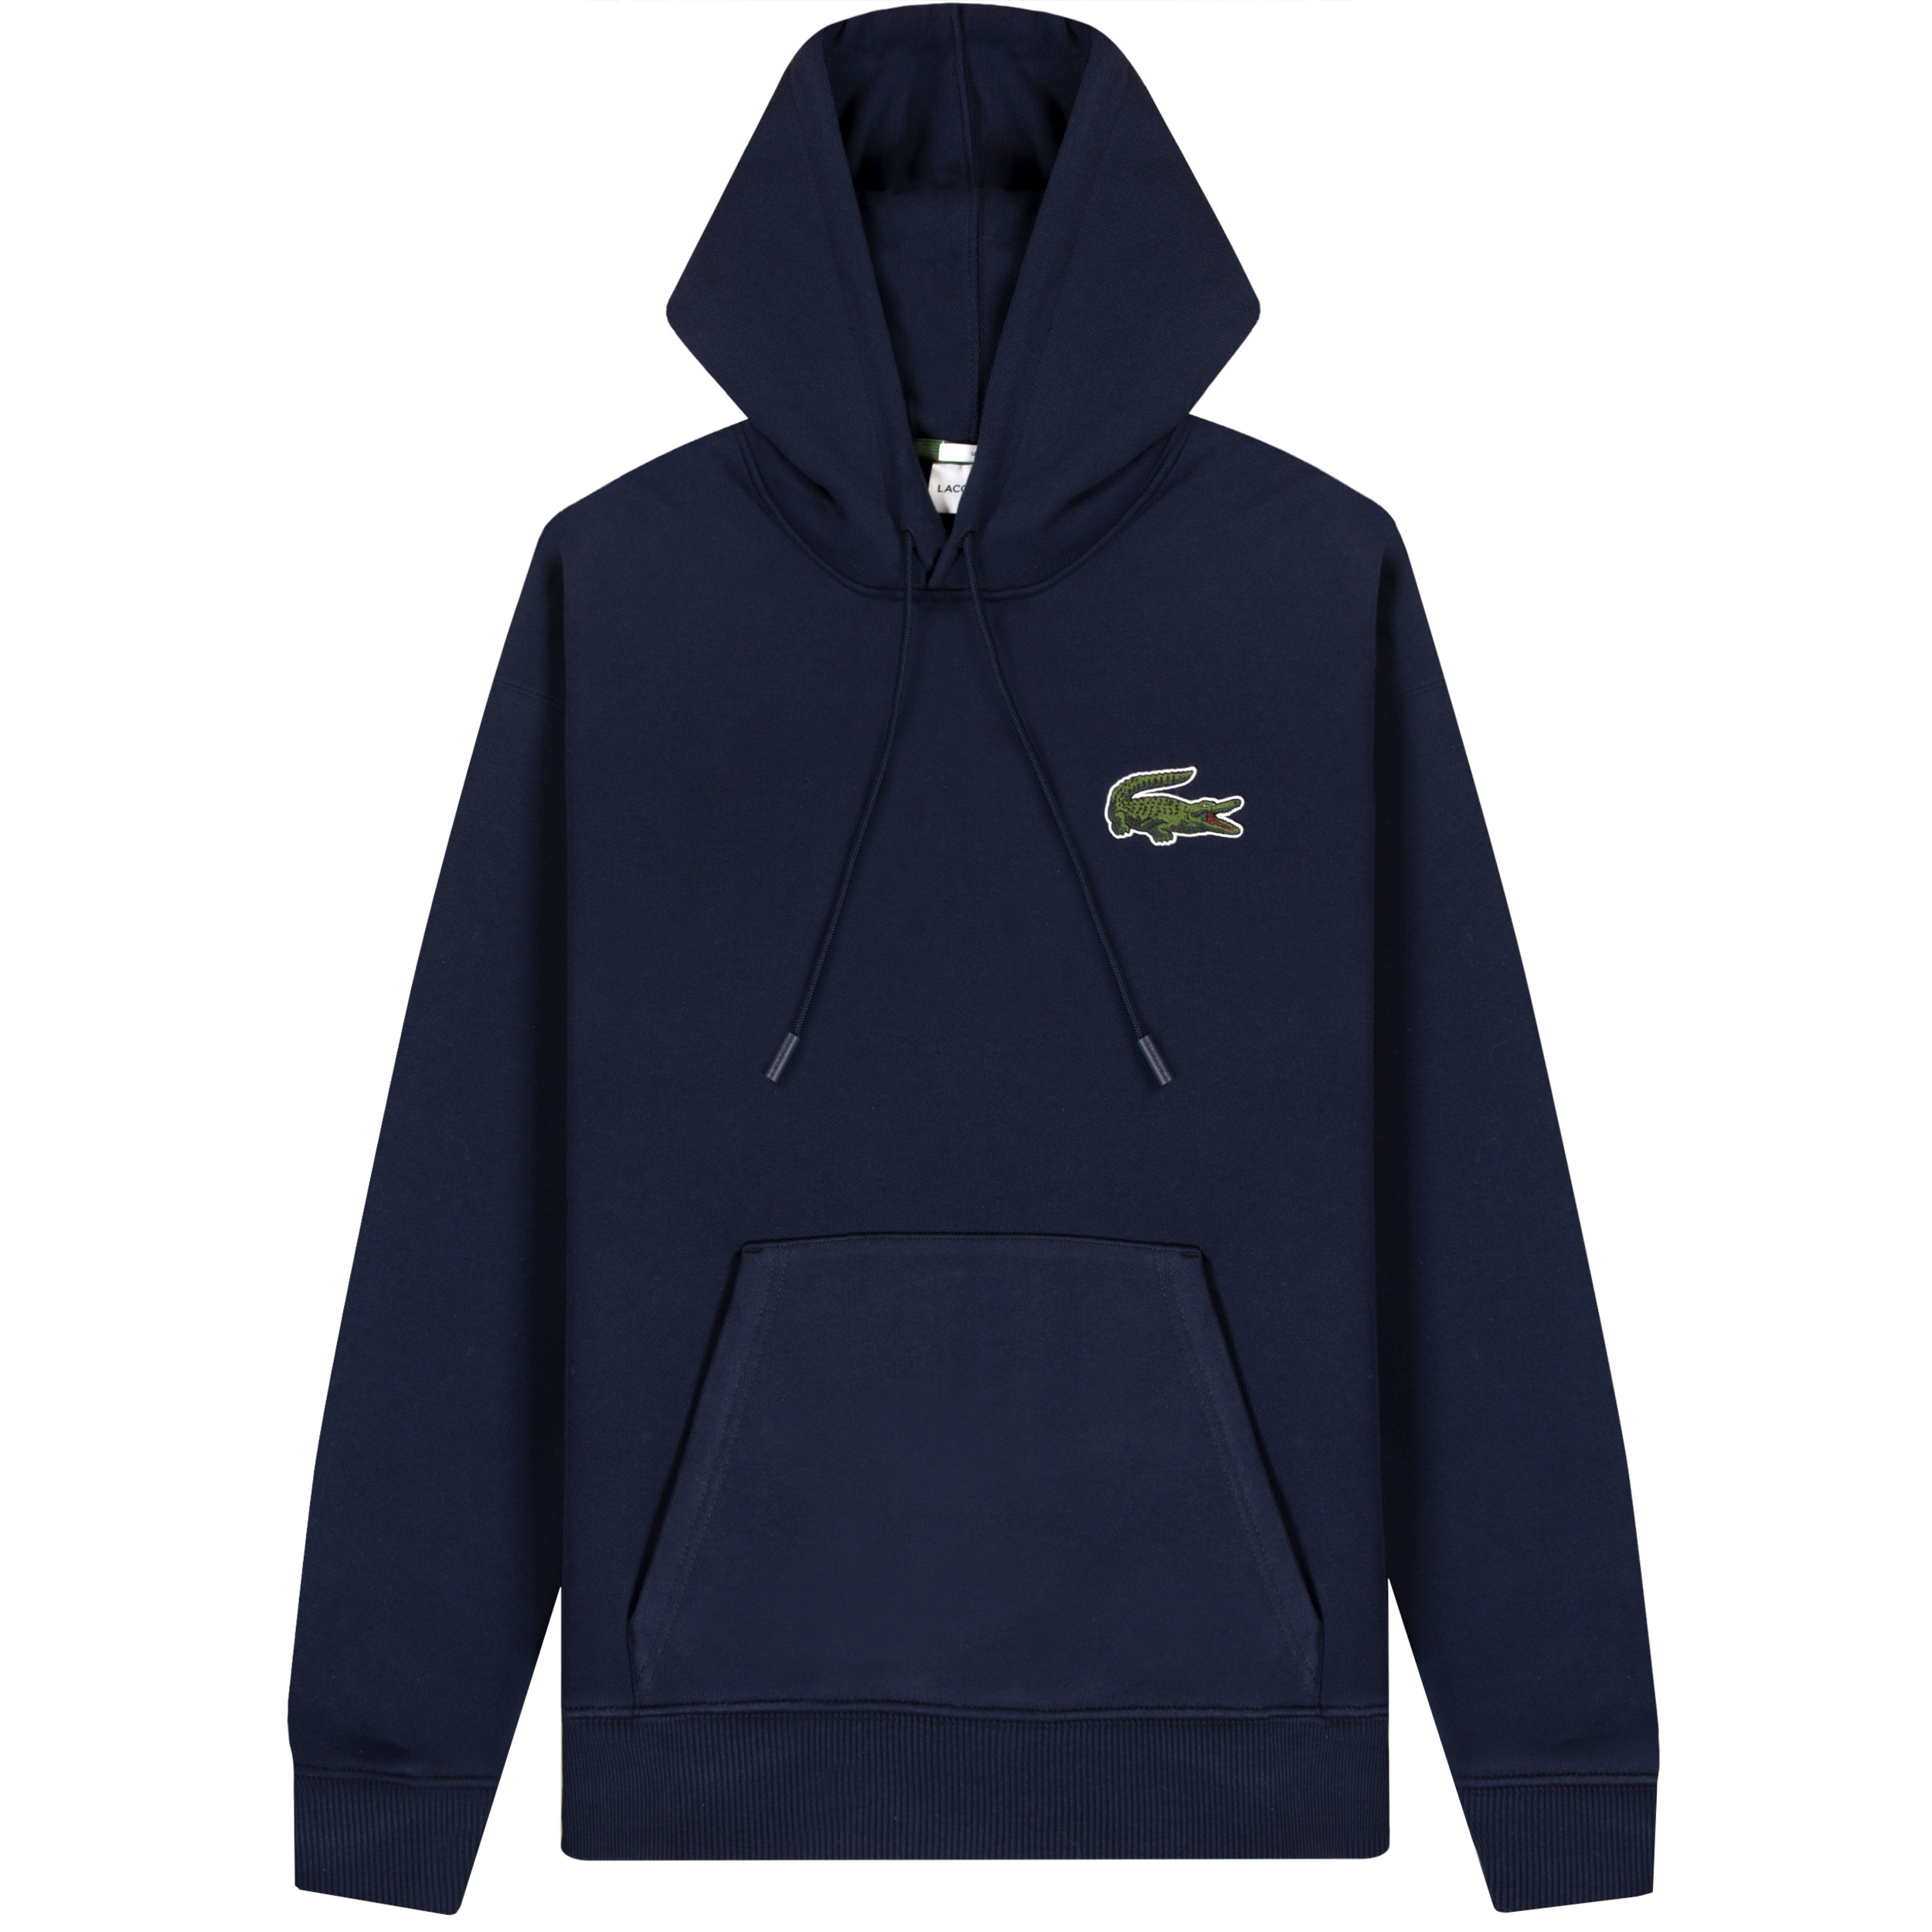 Lacoste Loose Fit Large Croc Chest Logo Hoodie Navy